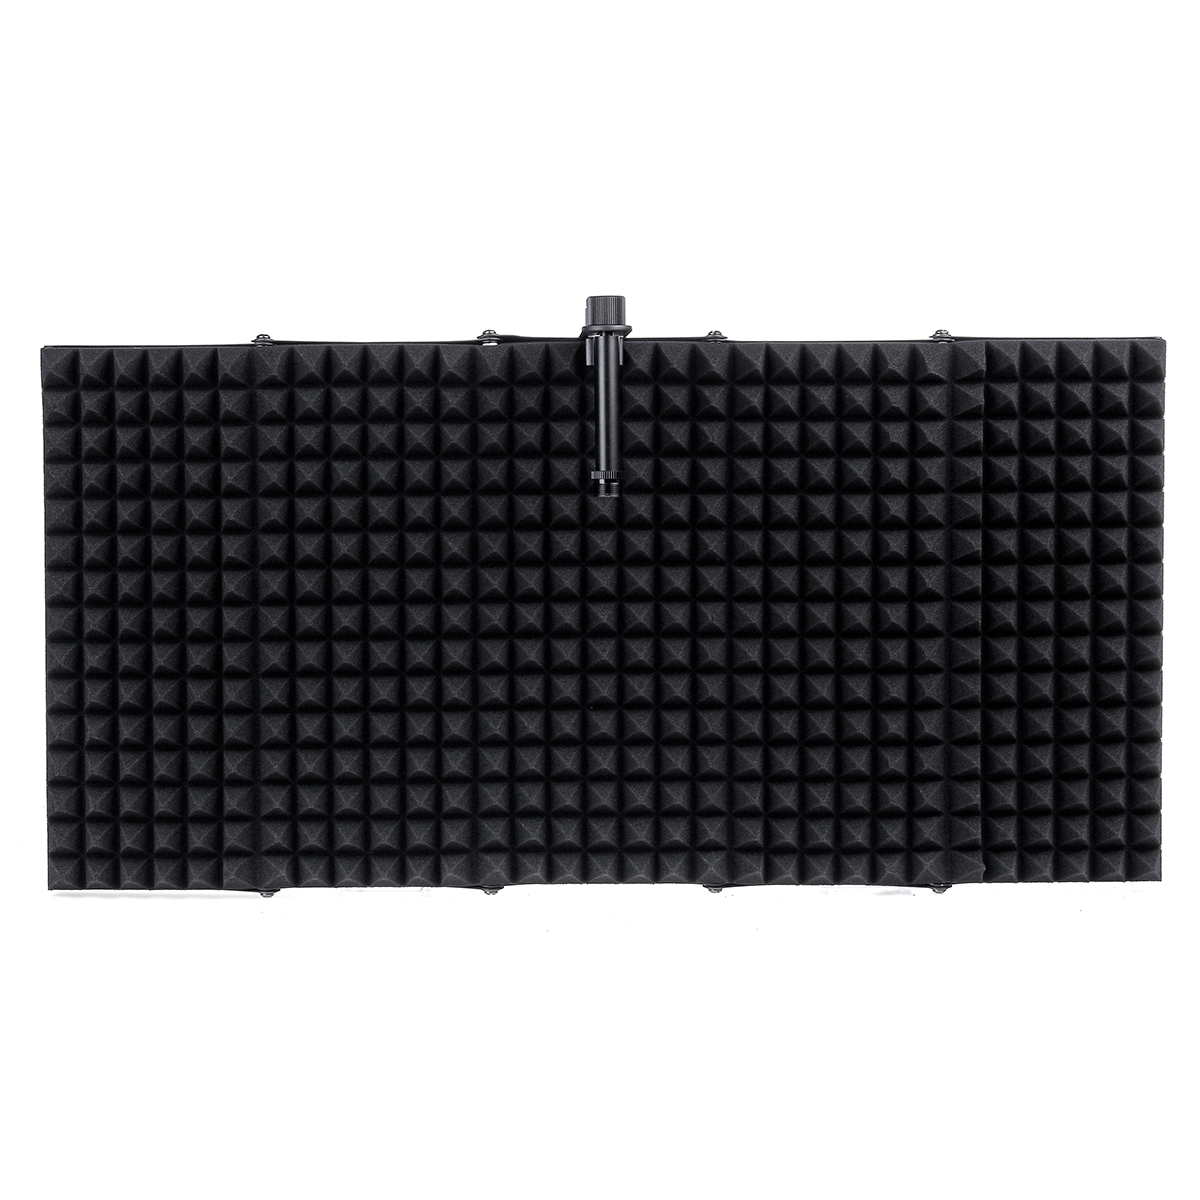 5-Panel-Foldable-Studio-Microphone-Isolation-Shield-Recording-Sound-Absorber-Foam-Panel-Support-Brac-1794721-8